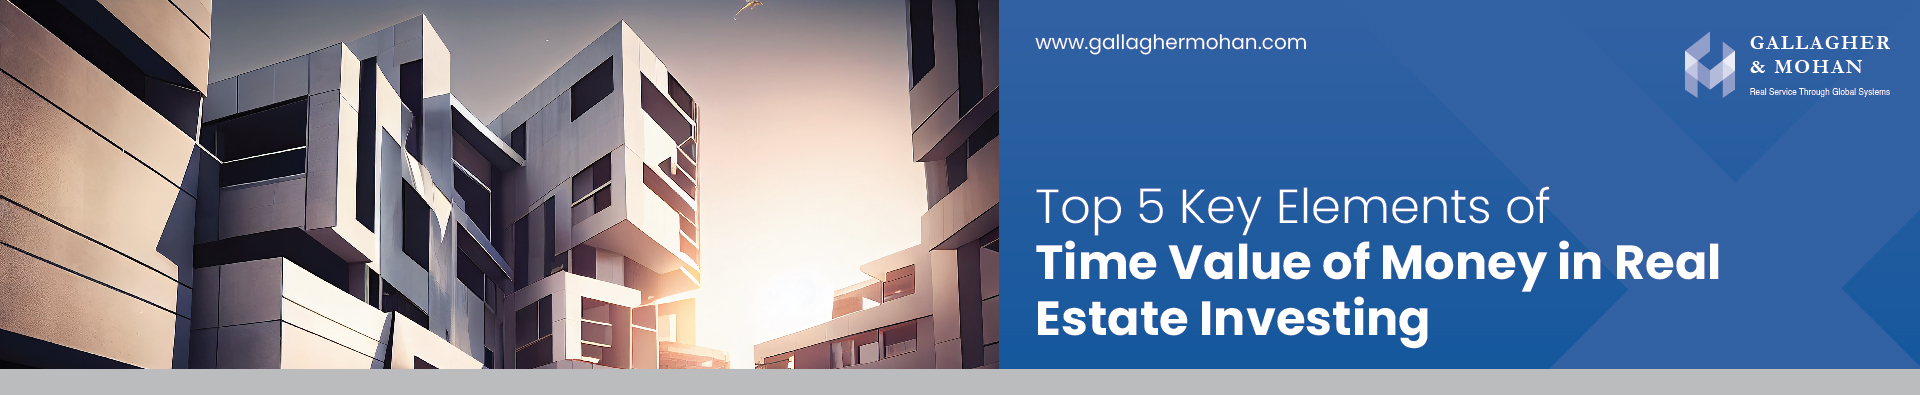 Top 5 Key Elements Of Time Value Of Money In Real Estate Investing